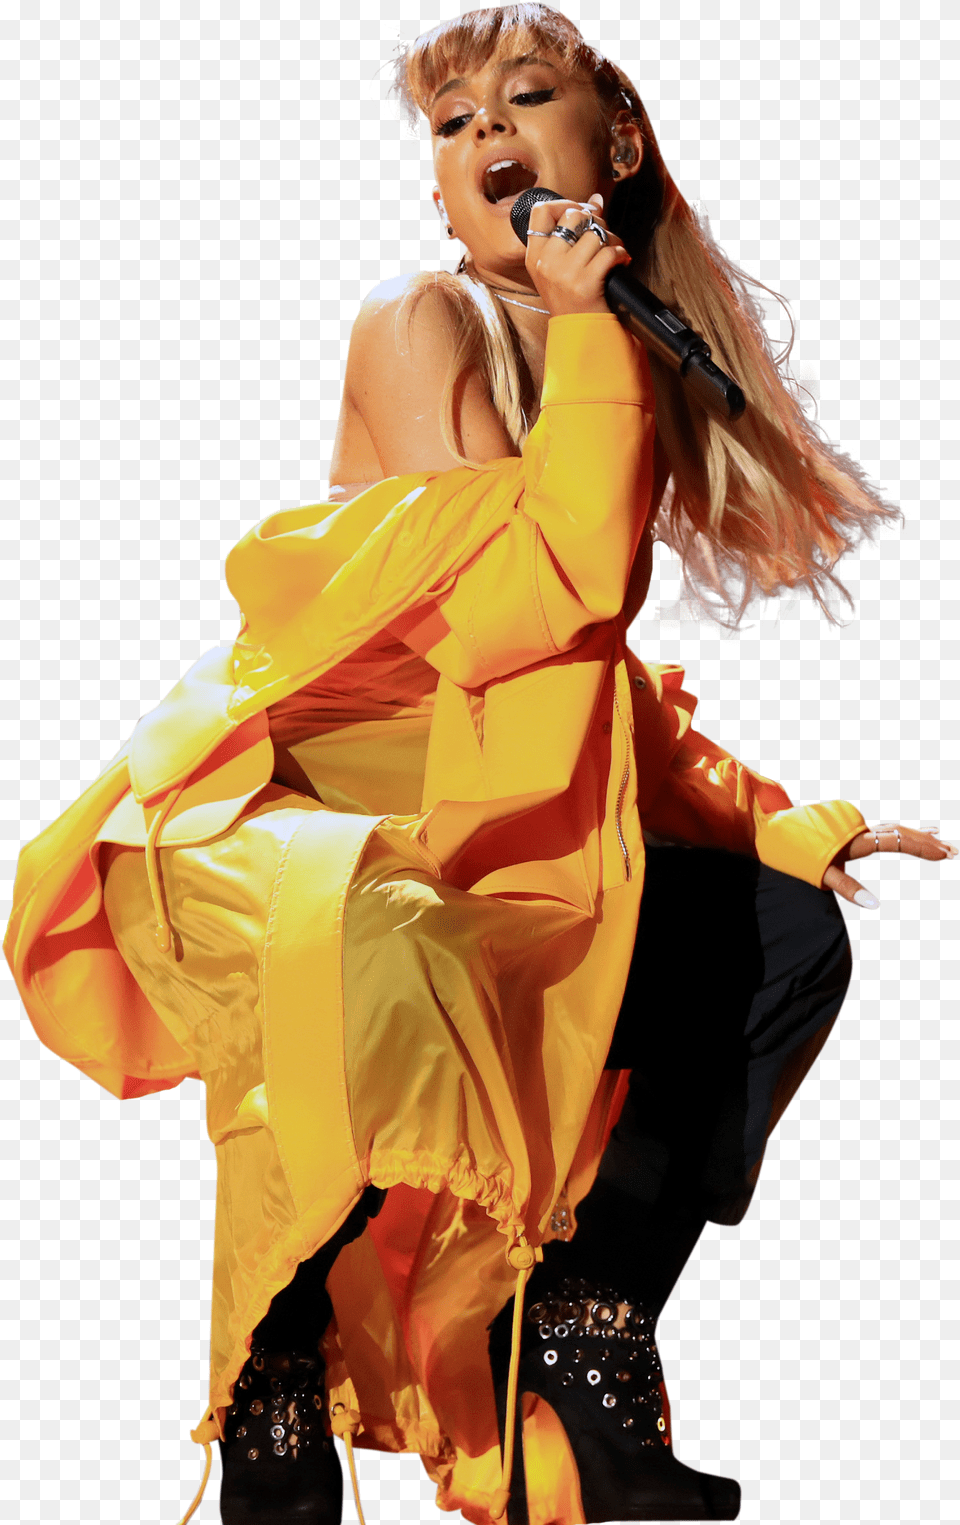 Ariana Grande In Yellow Dress On Stage Image Iheartradio Music Festival, Adult, Solo Performance, Person, Performer Free Png